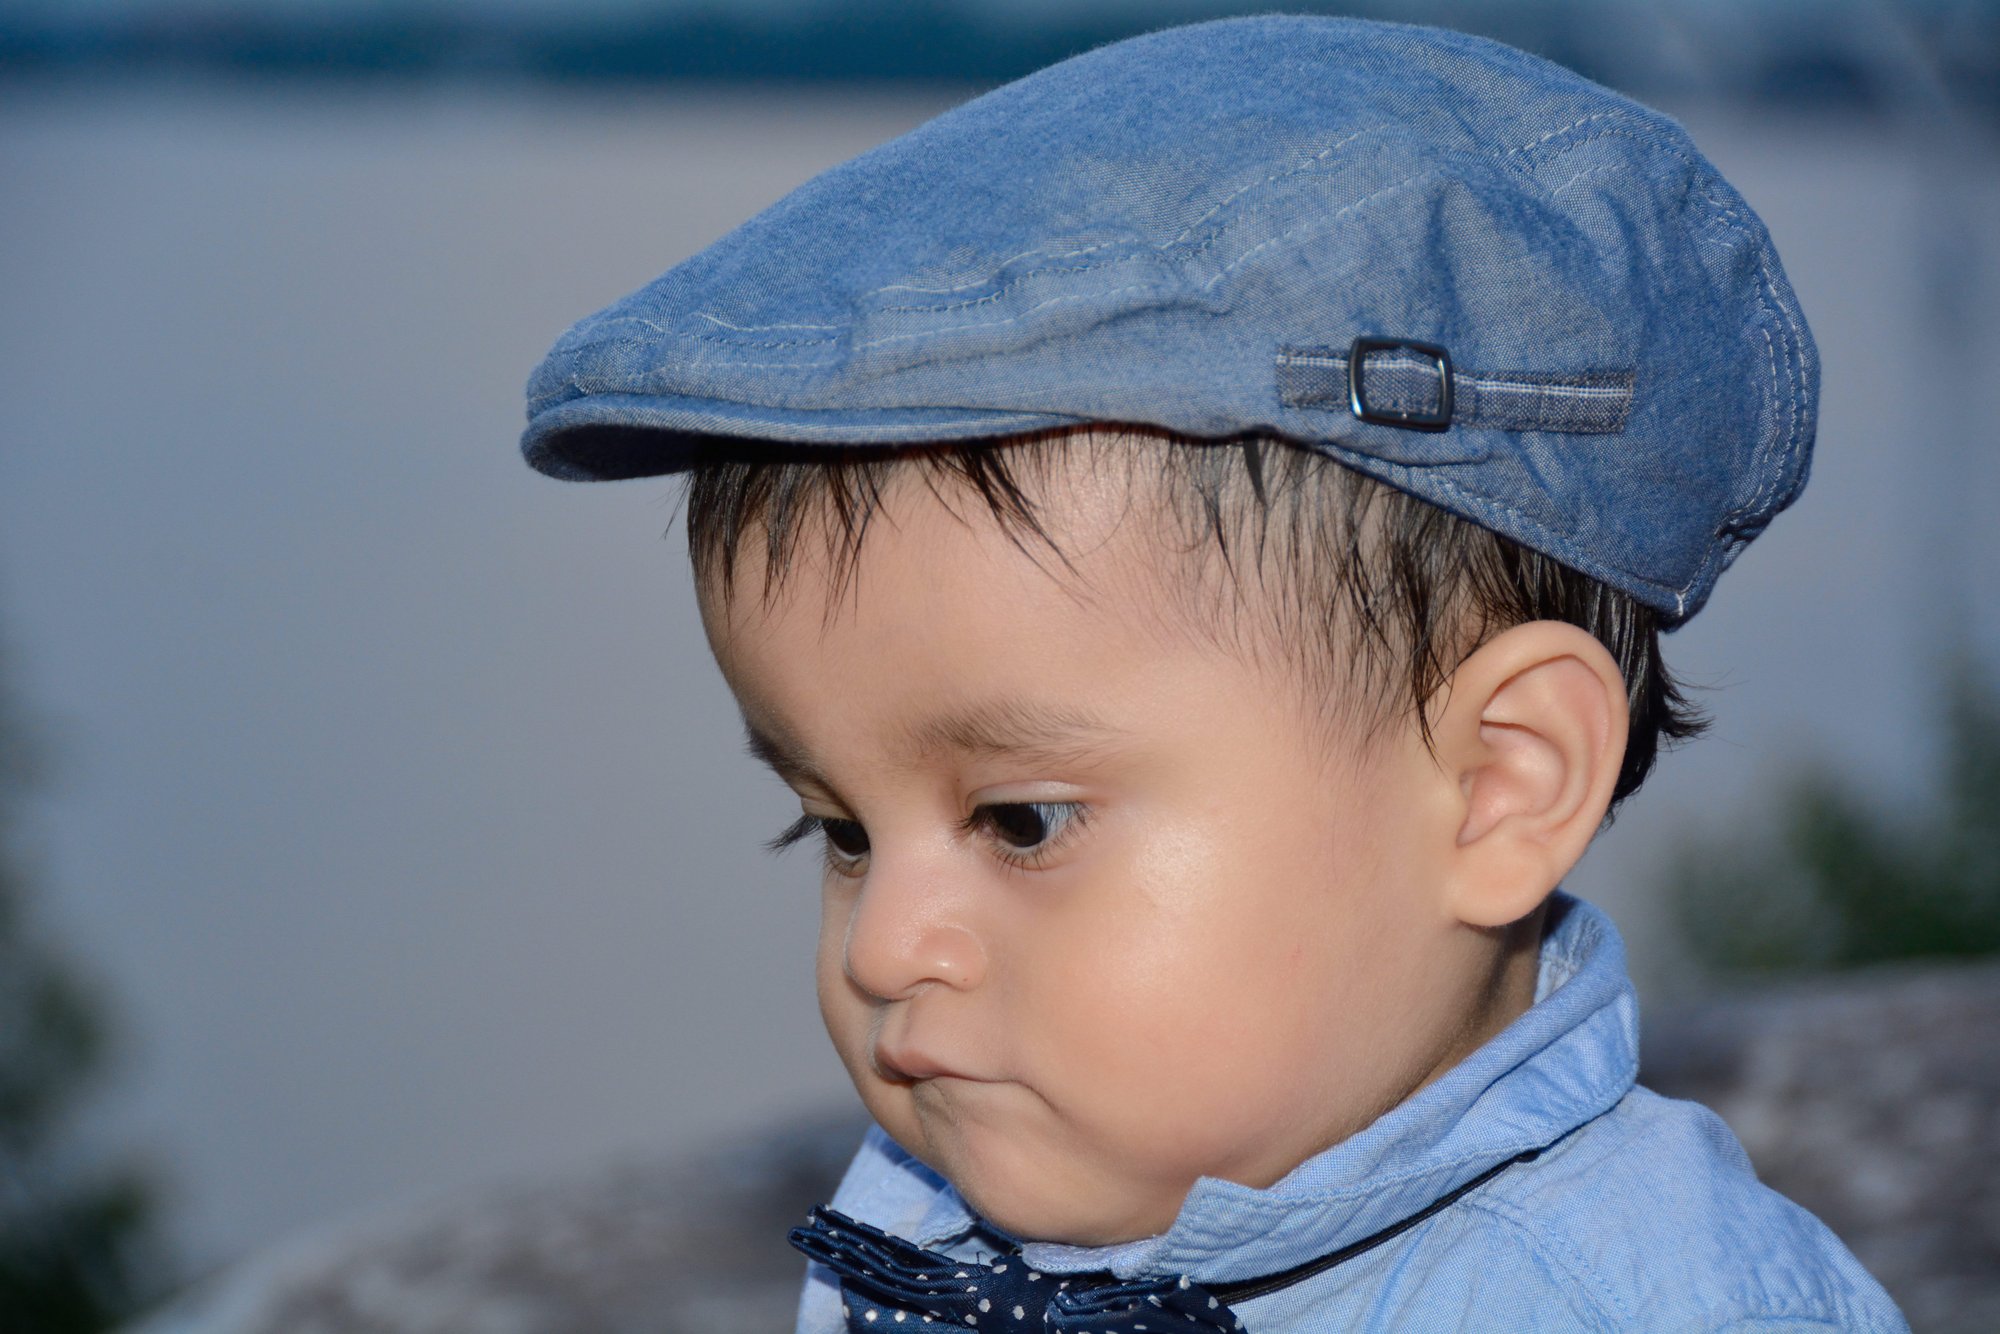 tomas hric photography stunning family photographer portrait of handsome little boy with blue hat national harbor md